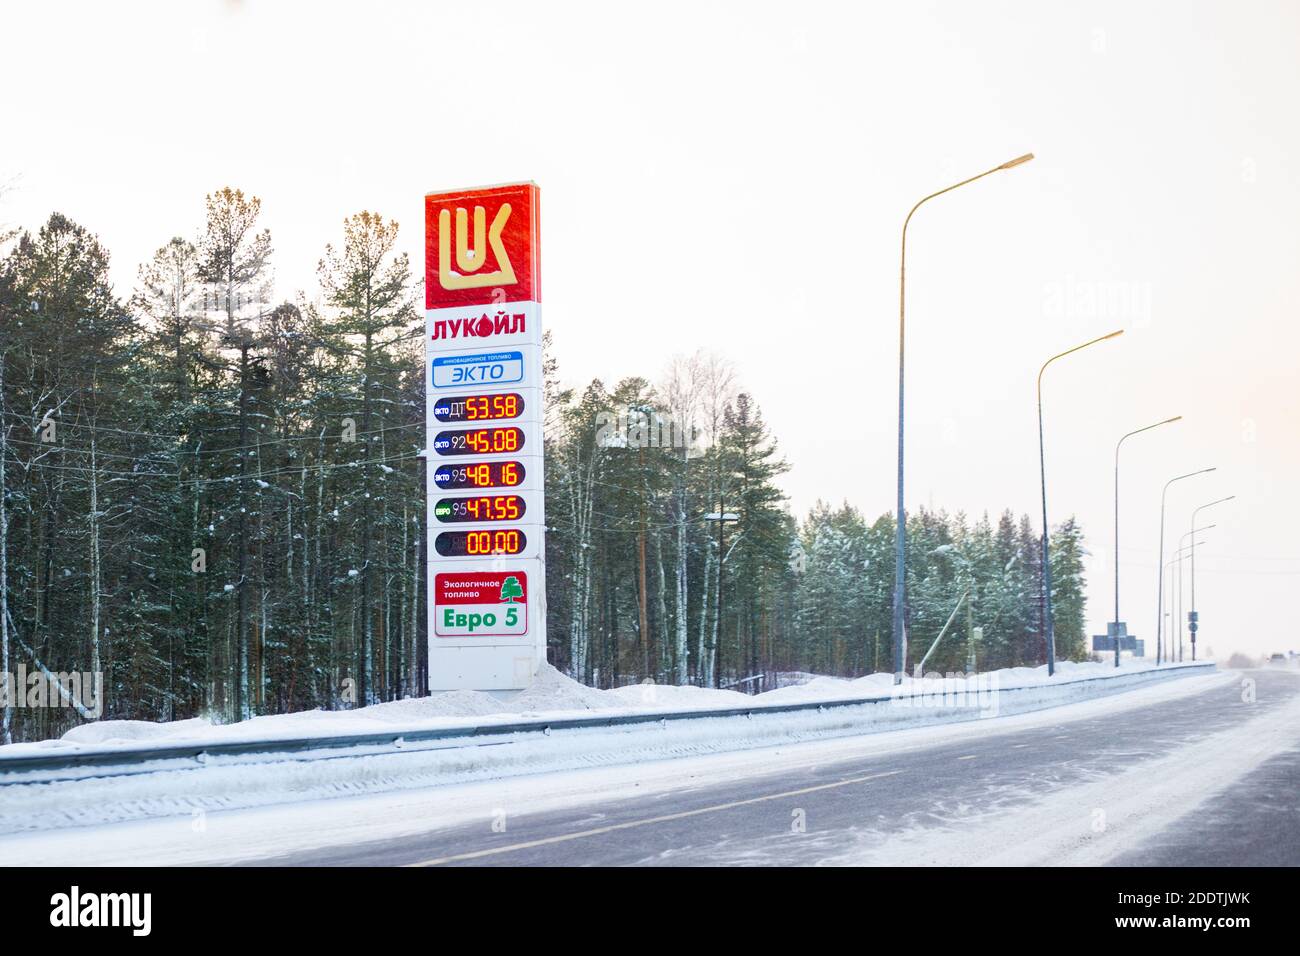 Surgut, Russia-01.25.2020: Information board of Lukoil gas station on the road, winter fuel prices.Ecological fuel transfer,blurred background Stock Photo